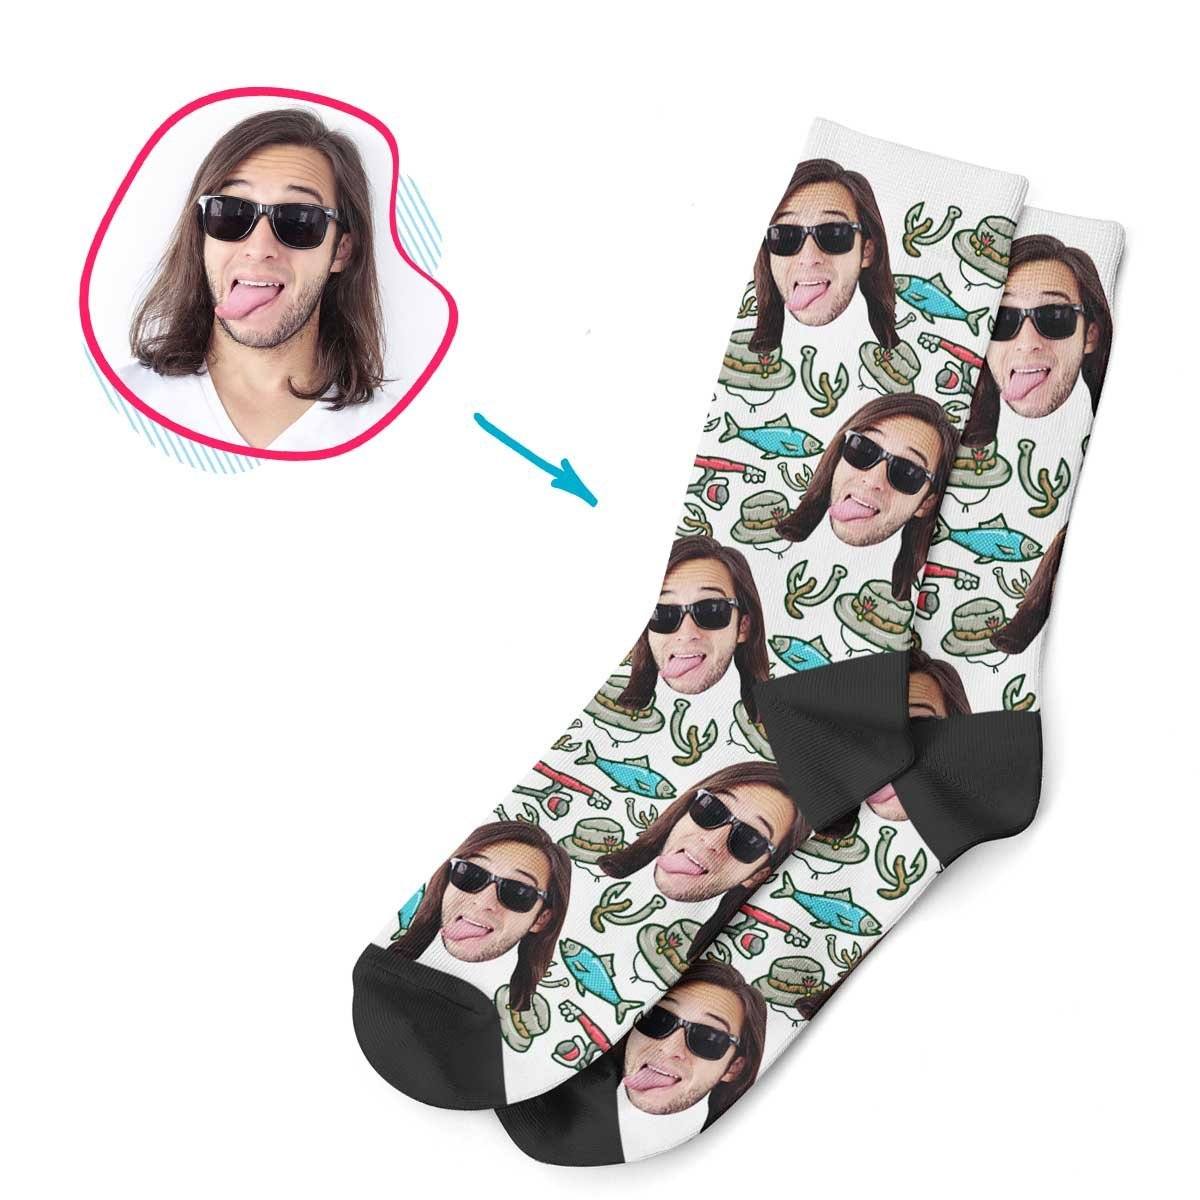 White Fishing personalized socks with photo of face printed on them